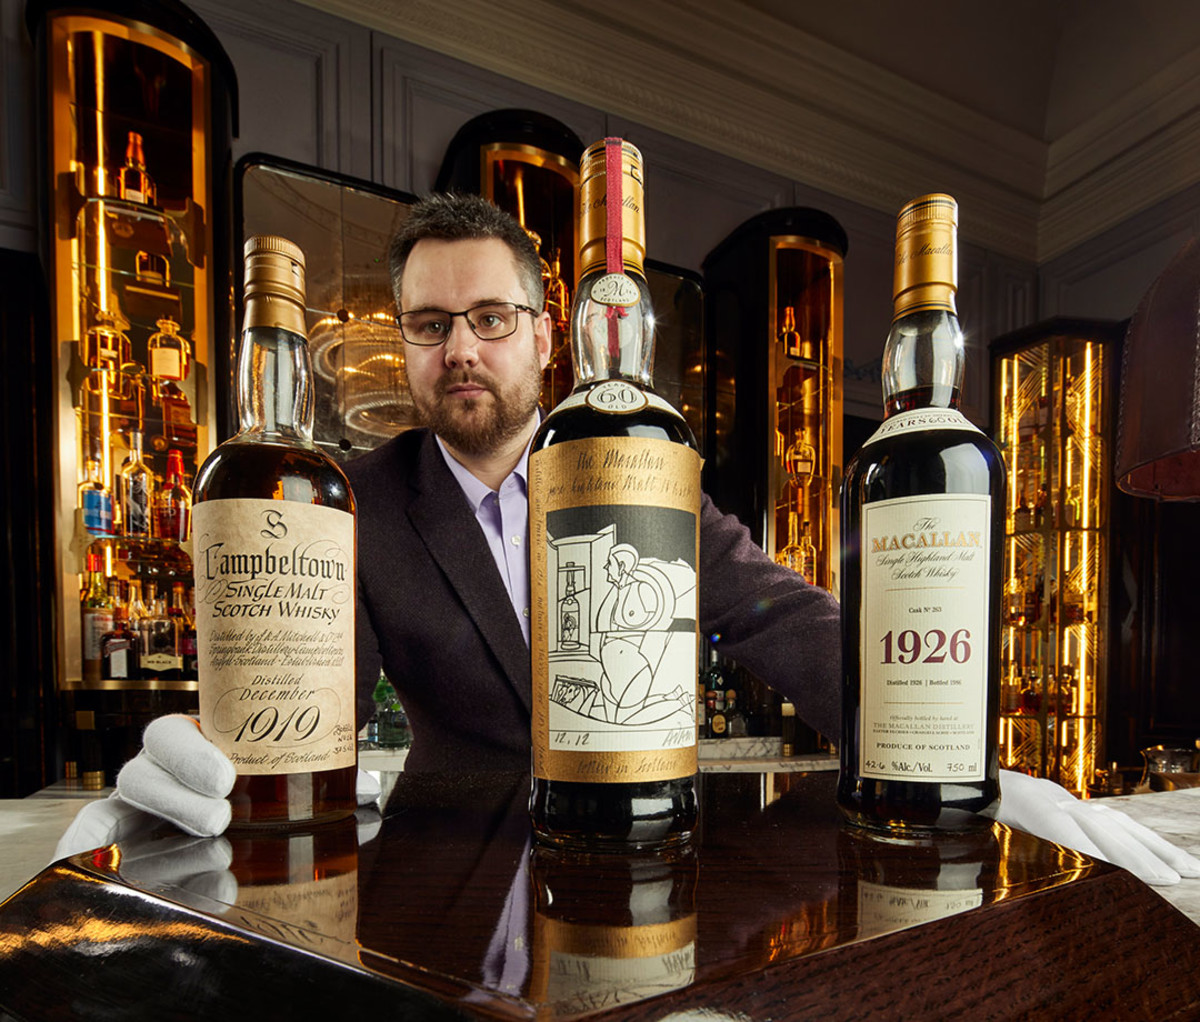 Whisky Auctioneer founder Iain McClune with bottles of Springbank and Macallan